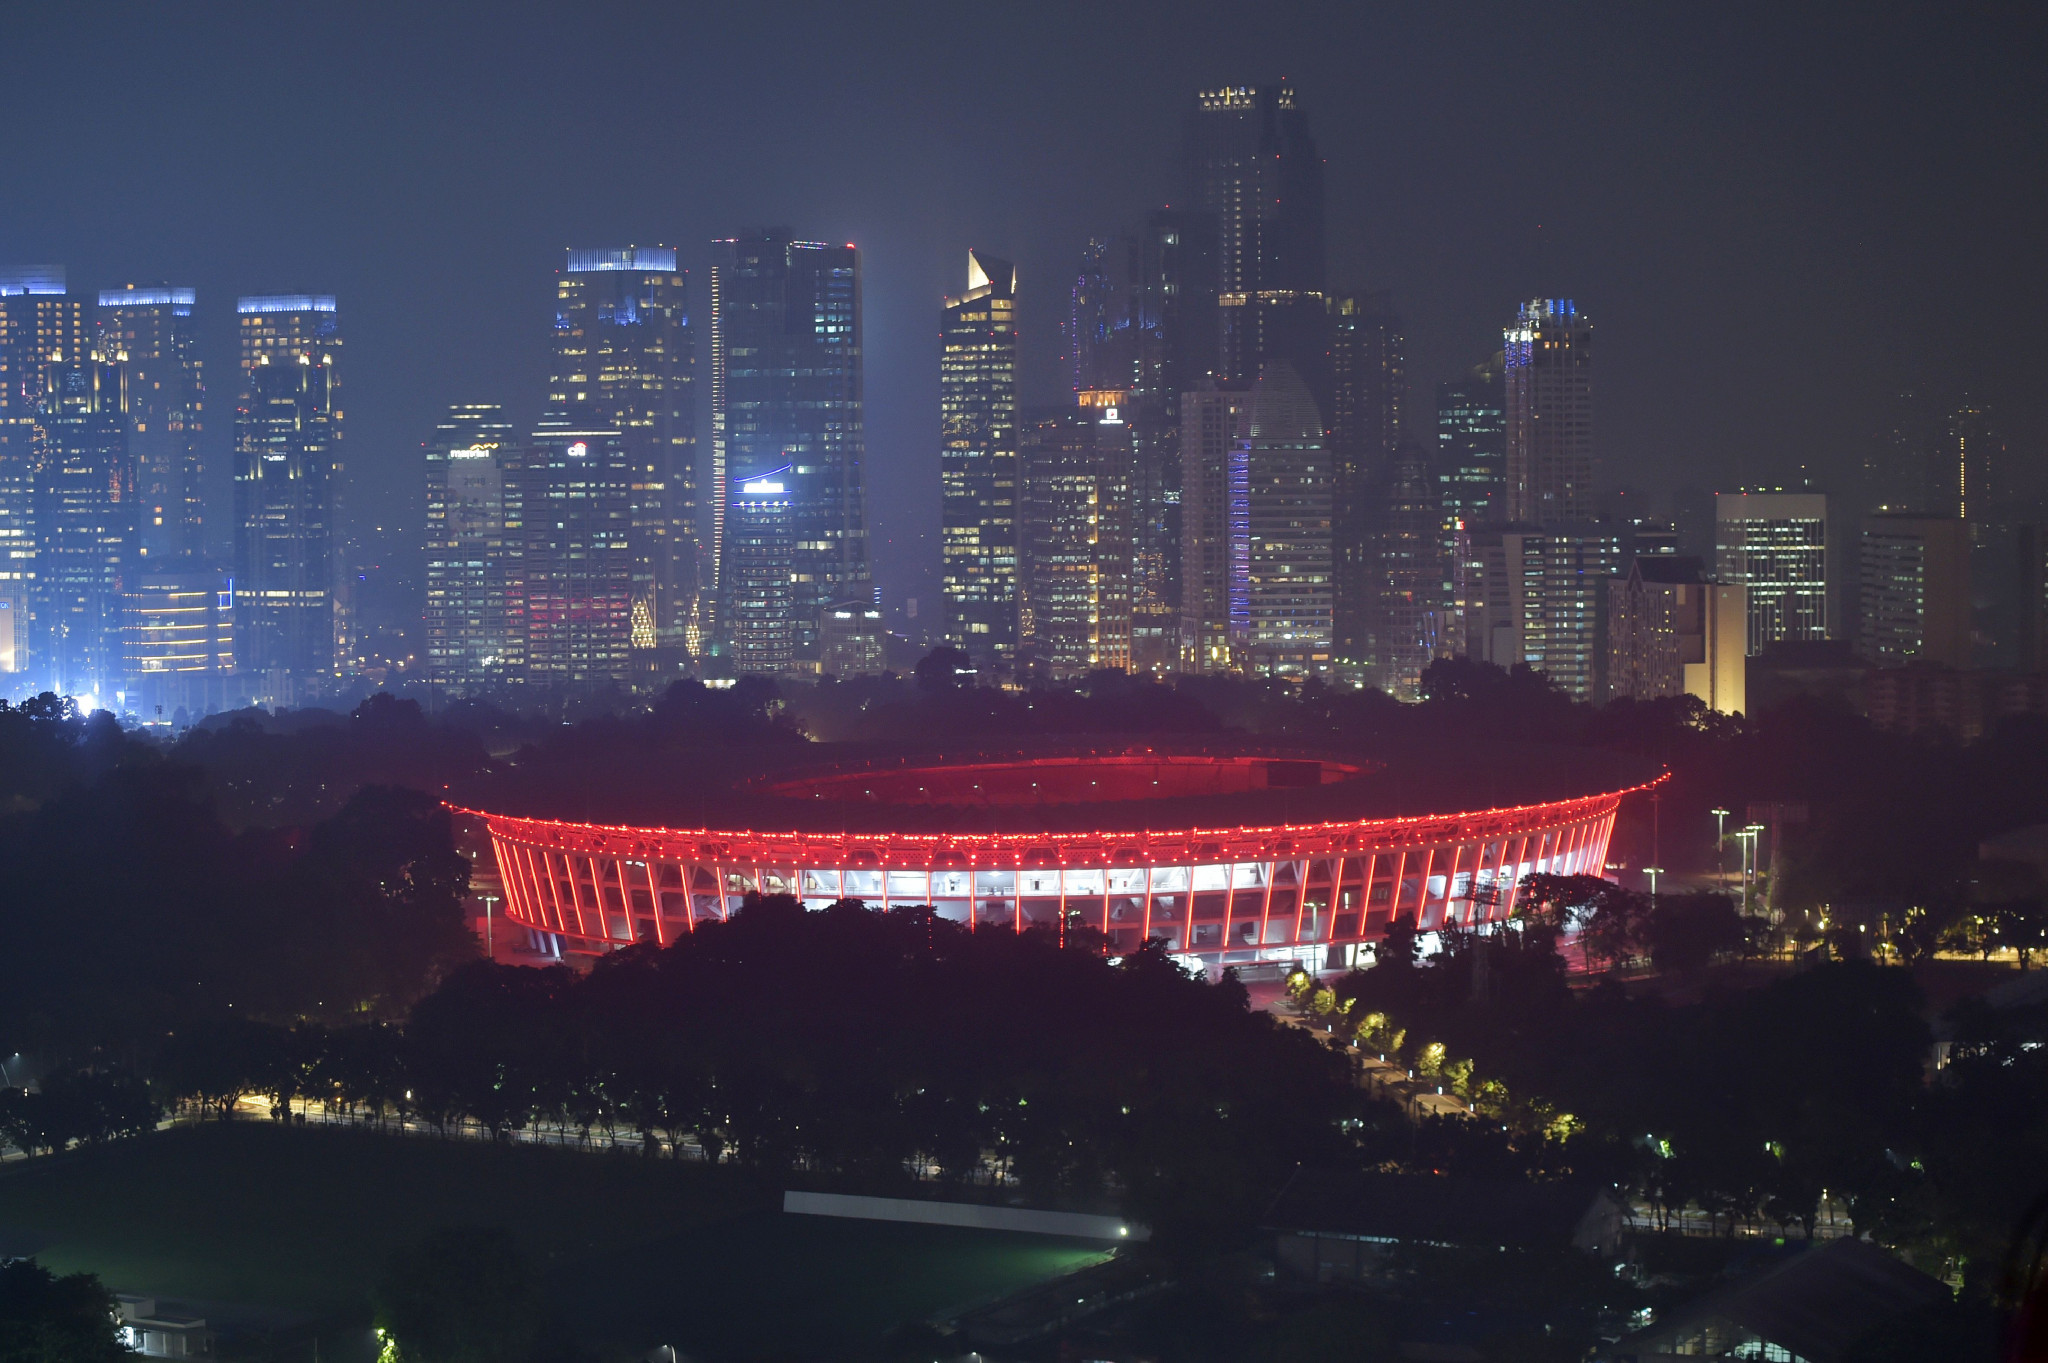 The Gelora Bung Karno Stadium in Jakarta was the focal venue of the 2018 Asian Games ©Getty Images